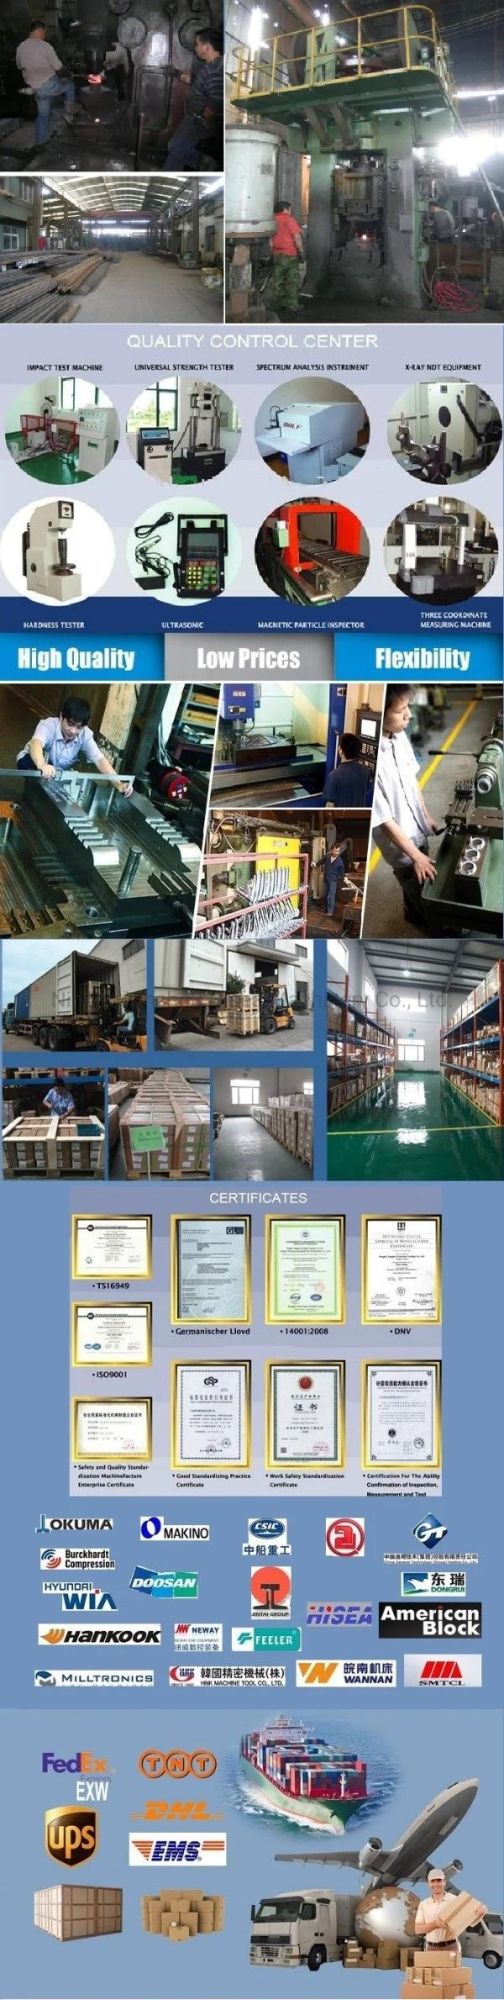 Investment Casting Machinery Hardware Accessories